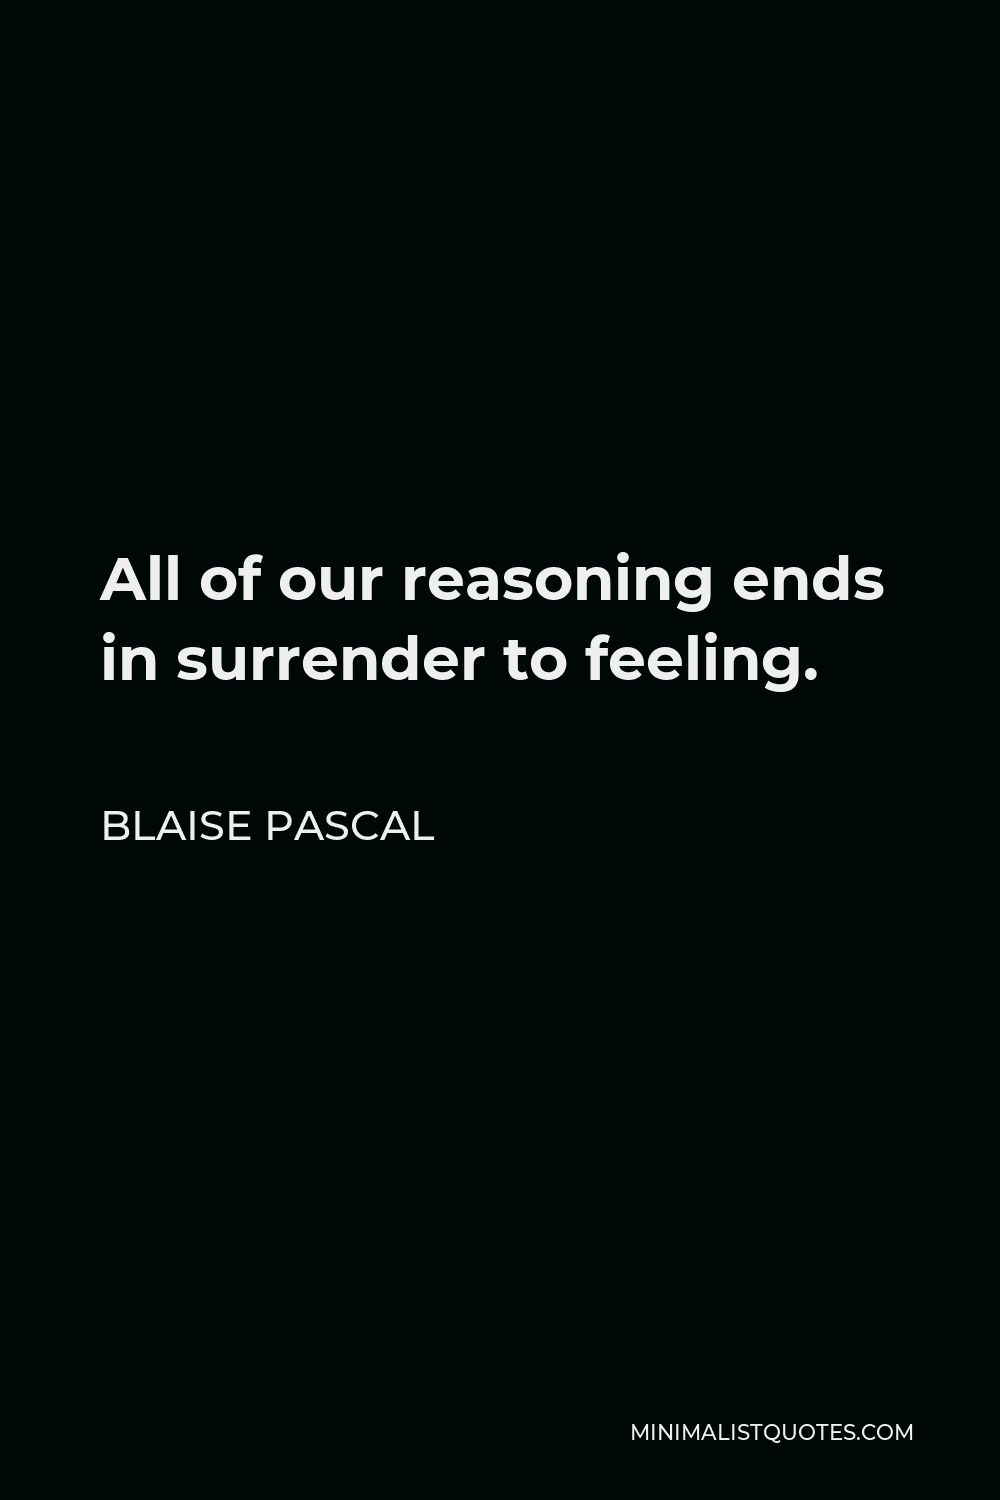 Blaise Pascal Quote - All of our reasoning ends in surrender to feeling.